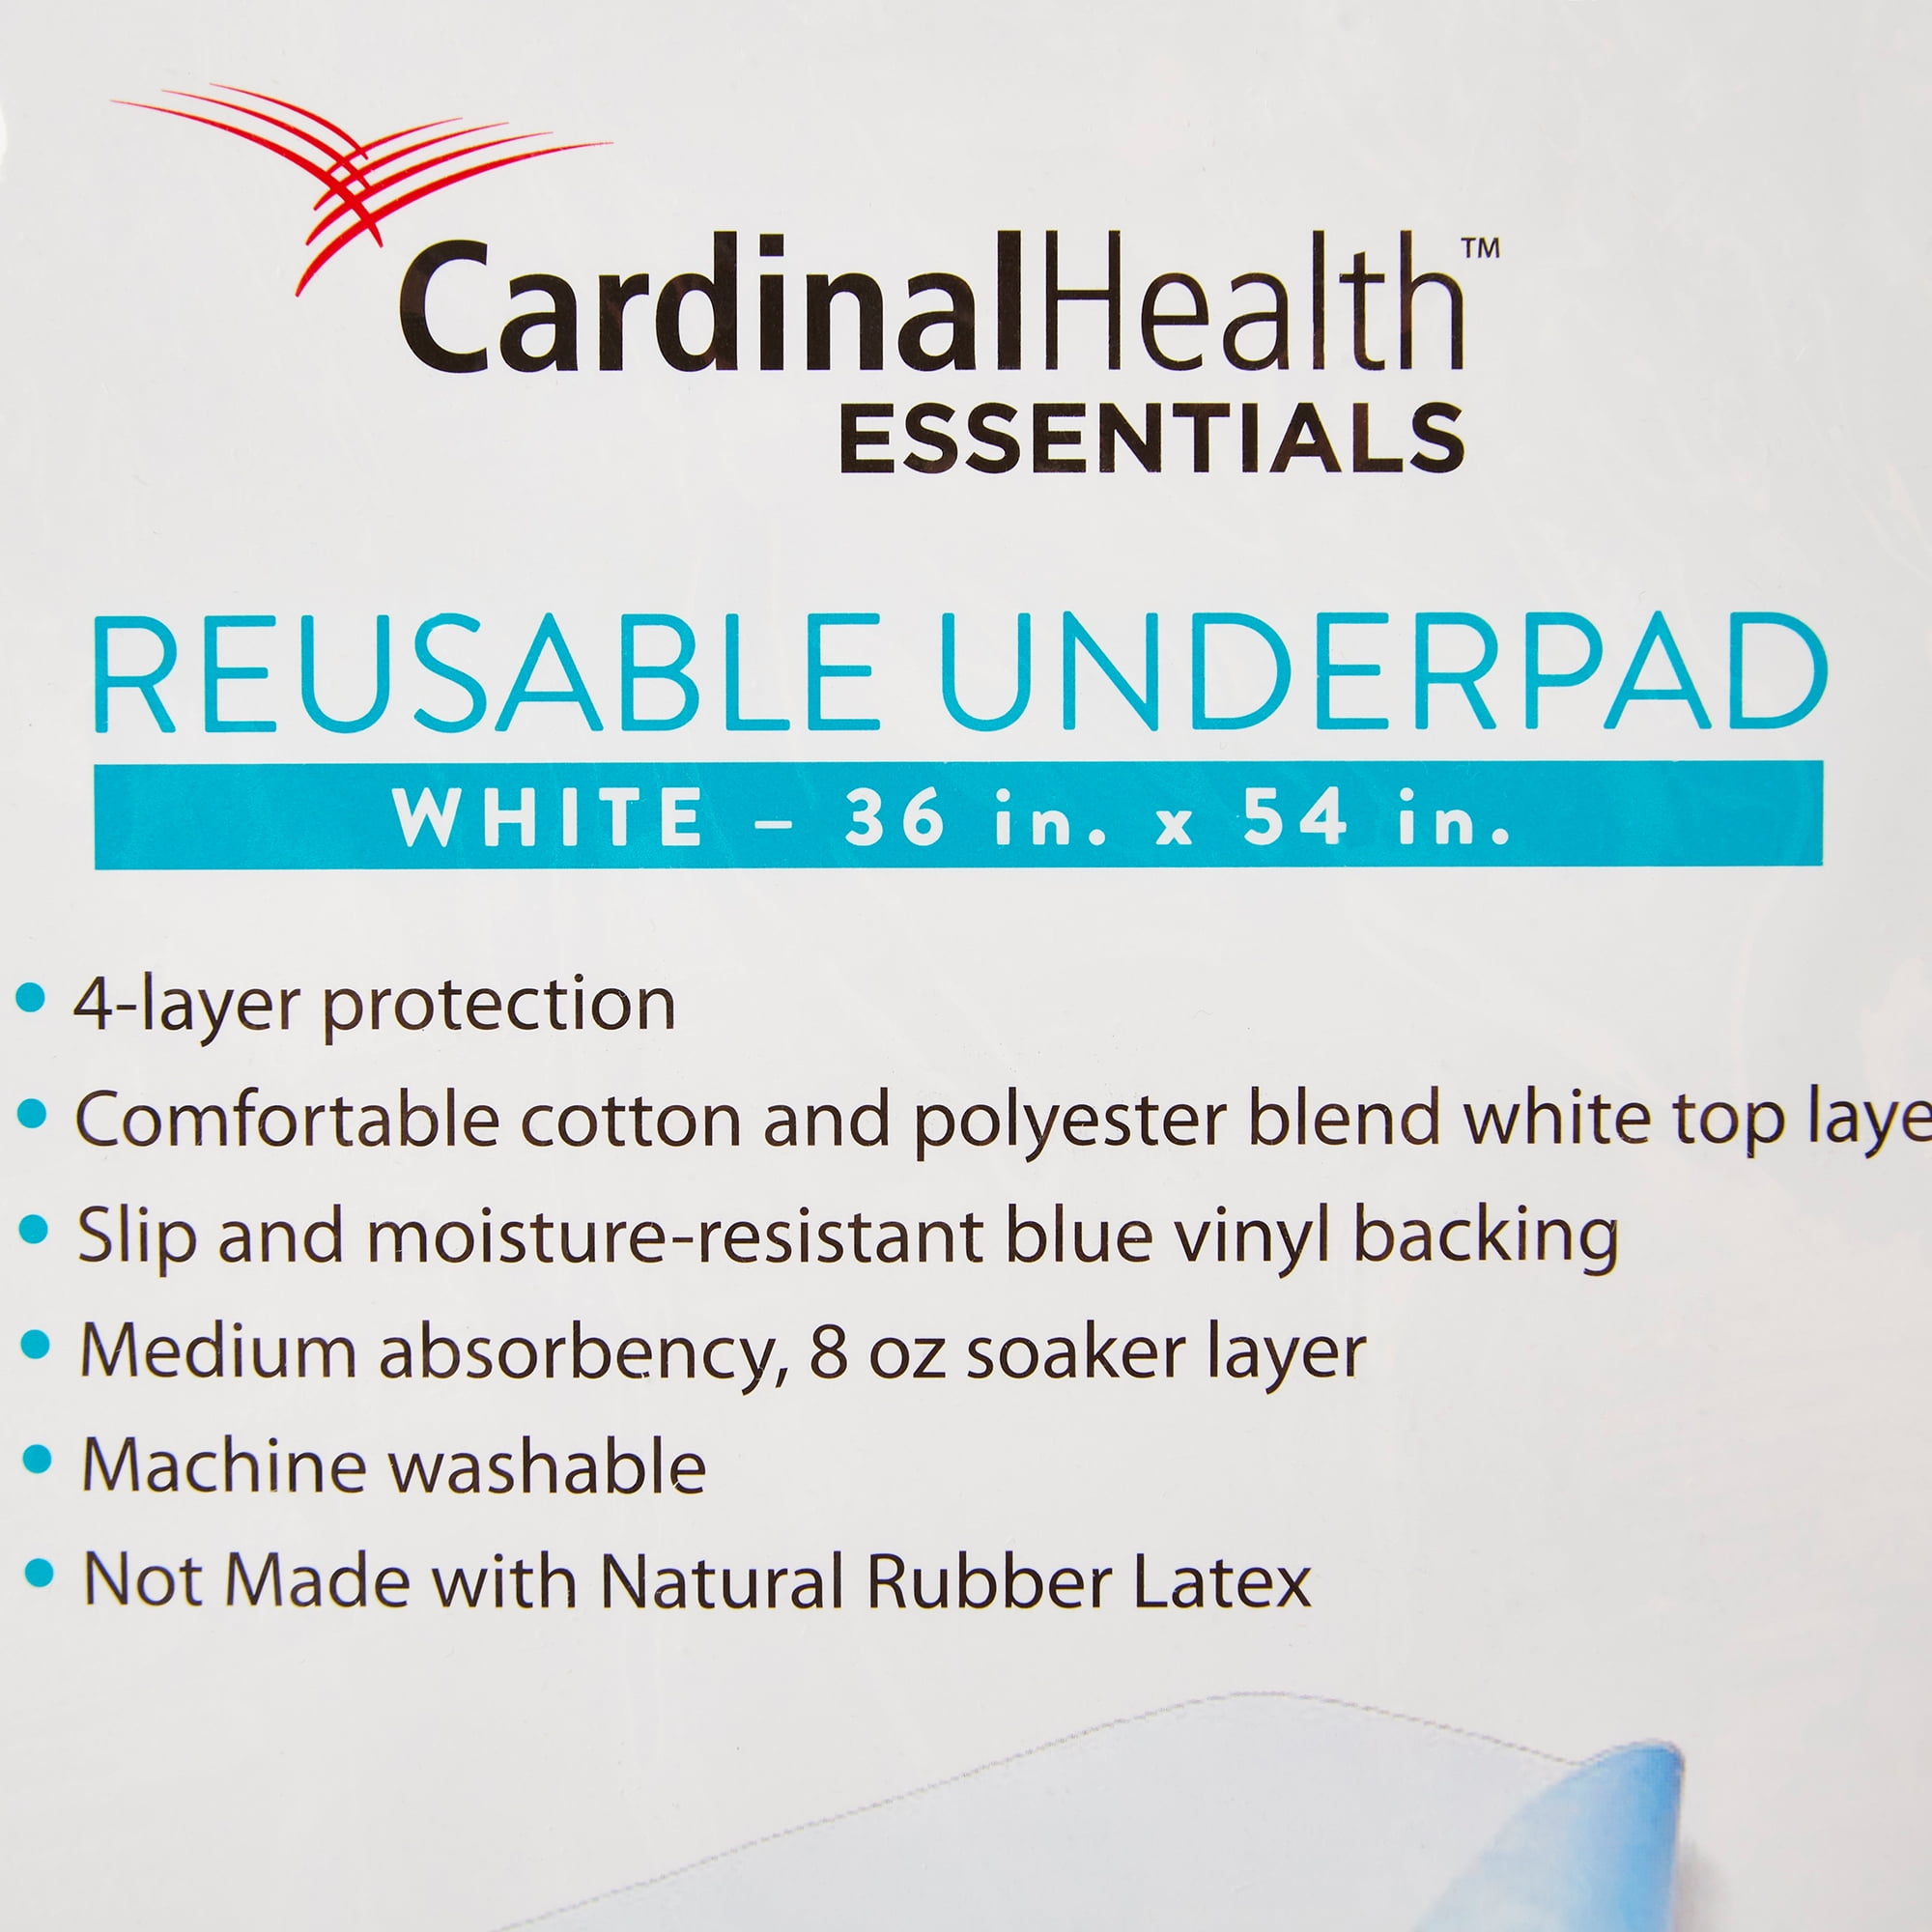 Cardinal Health Essentials Reusable Underpads Incontinent Bed Pads